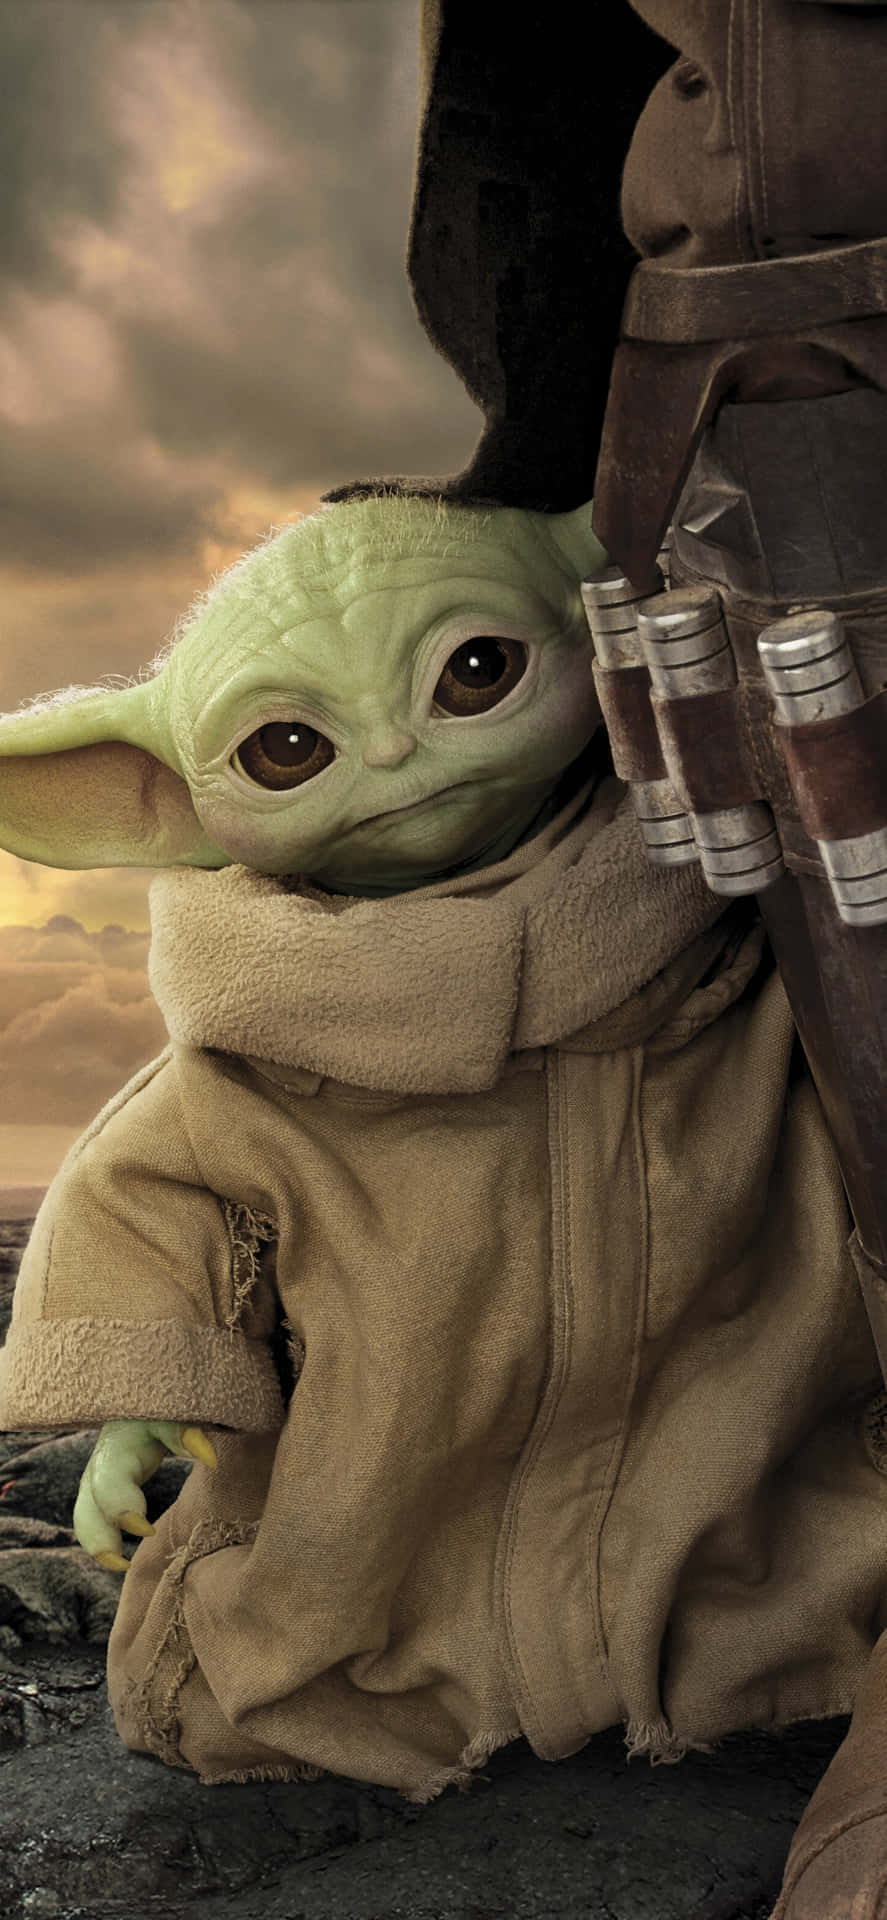 Get the Baby Yoda Phone today and experience the power of the force! Wallpaper